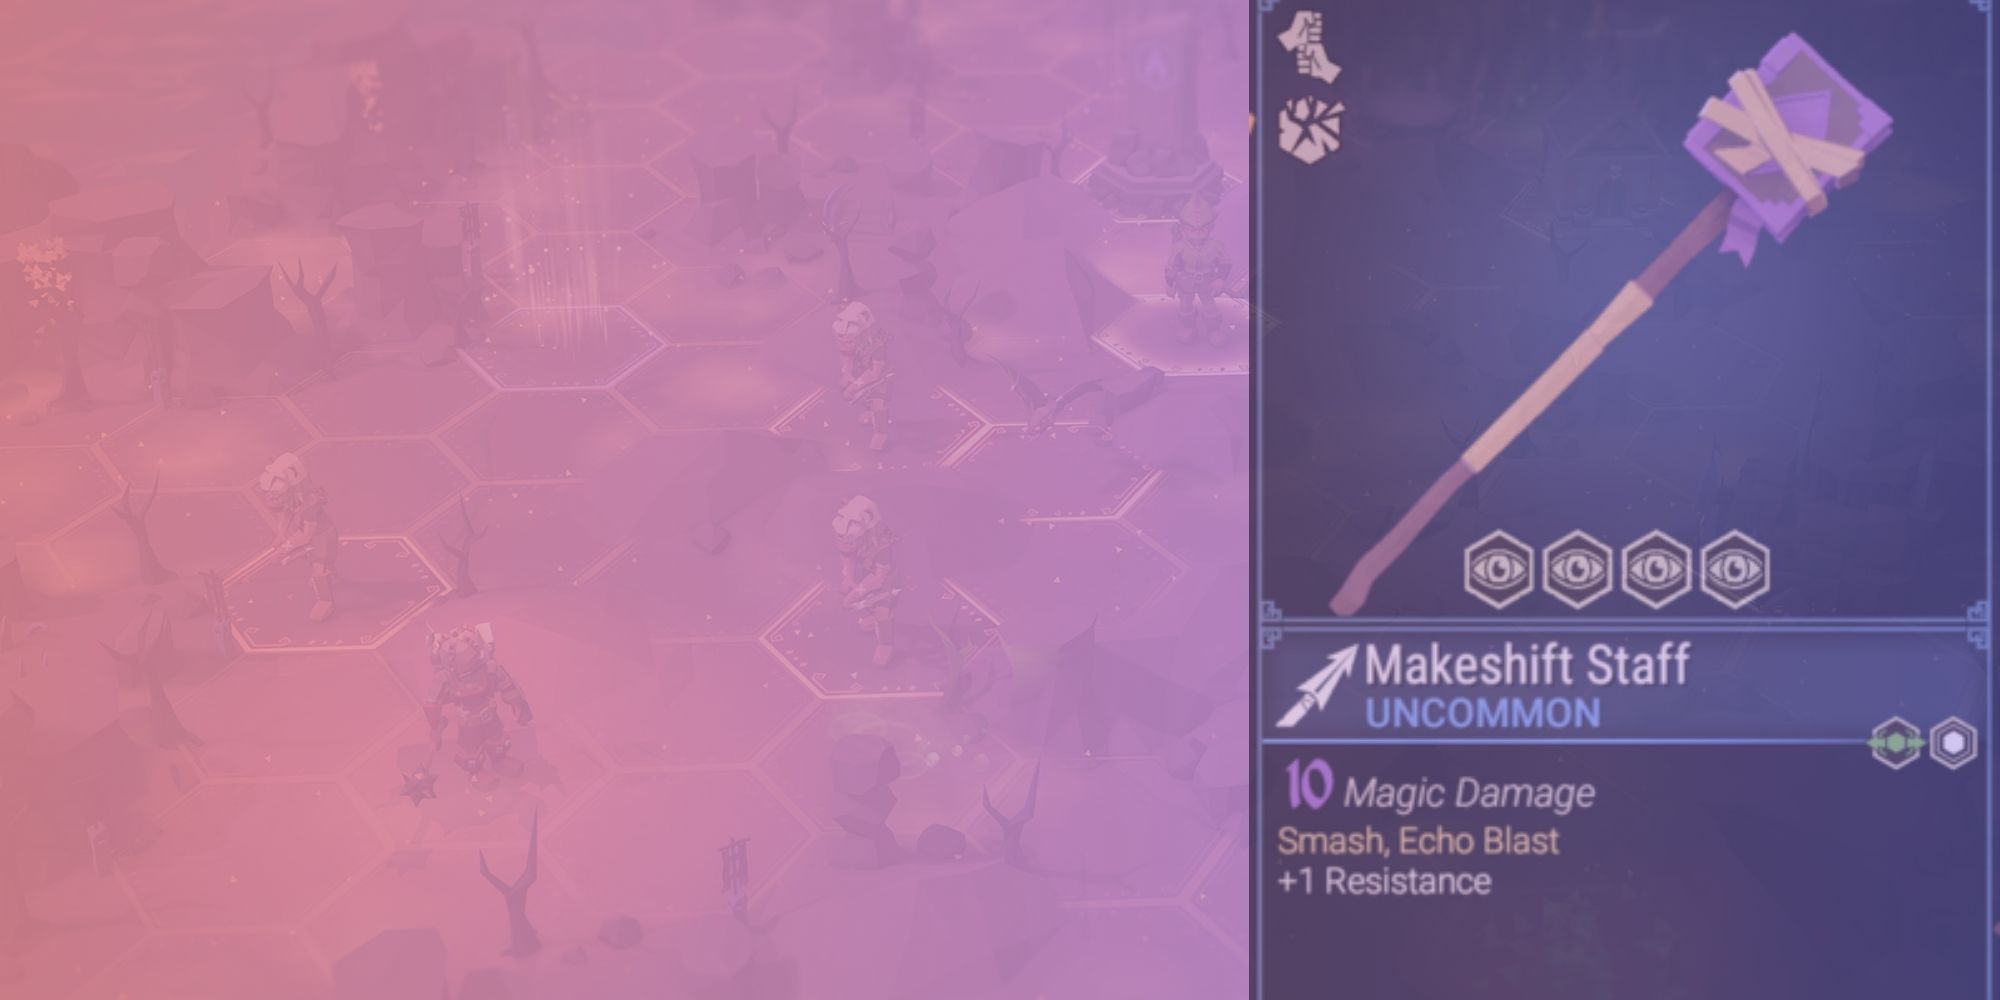 Makeshift staff stats over a pink and purple gradient background